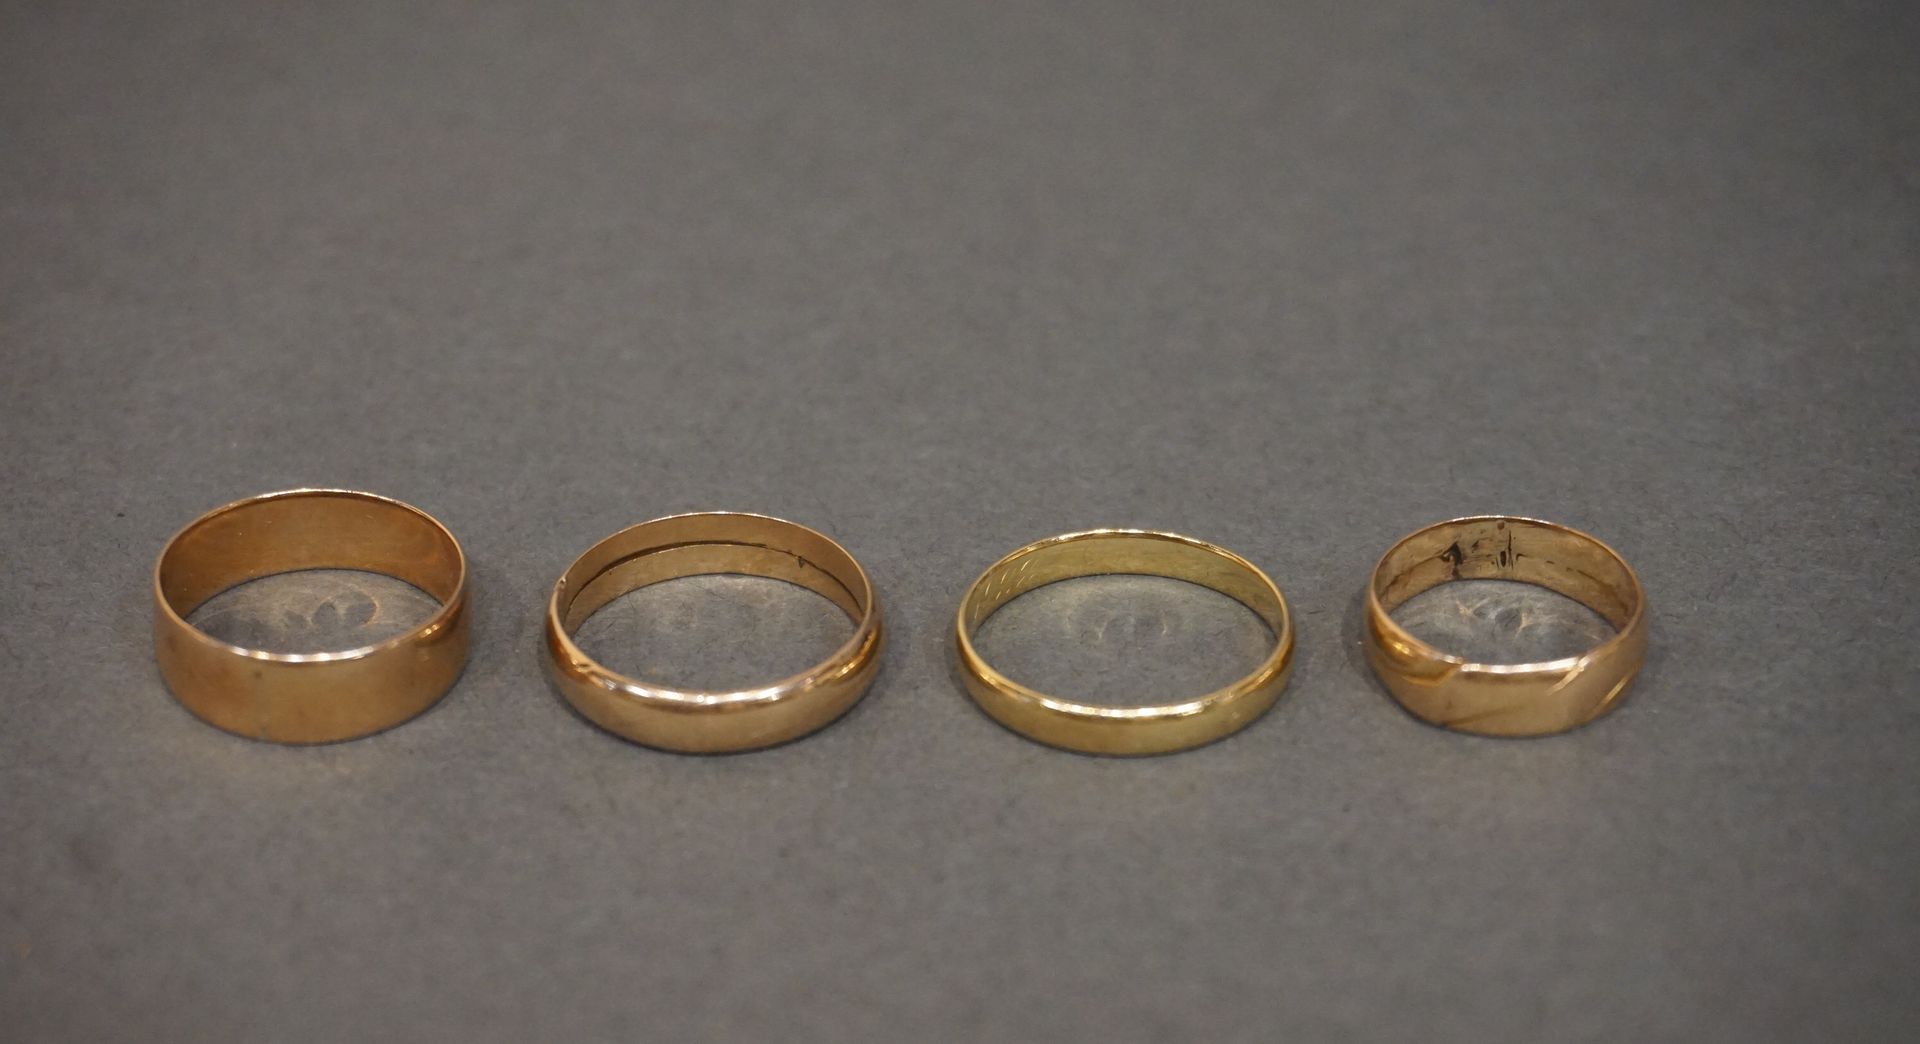 Alliances Four gold wedding rings (total weight: 14grs).